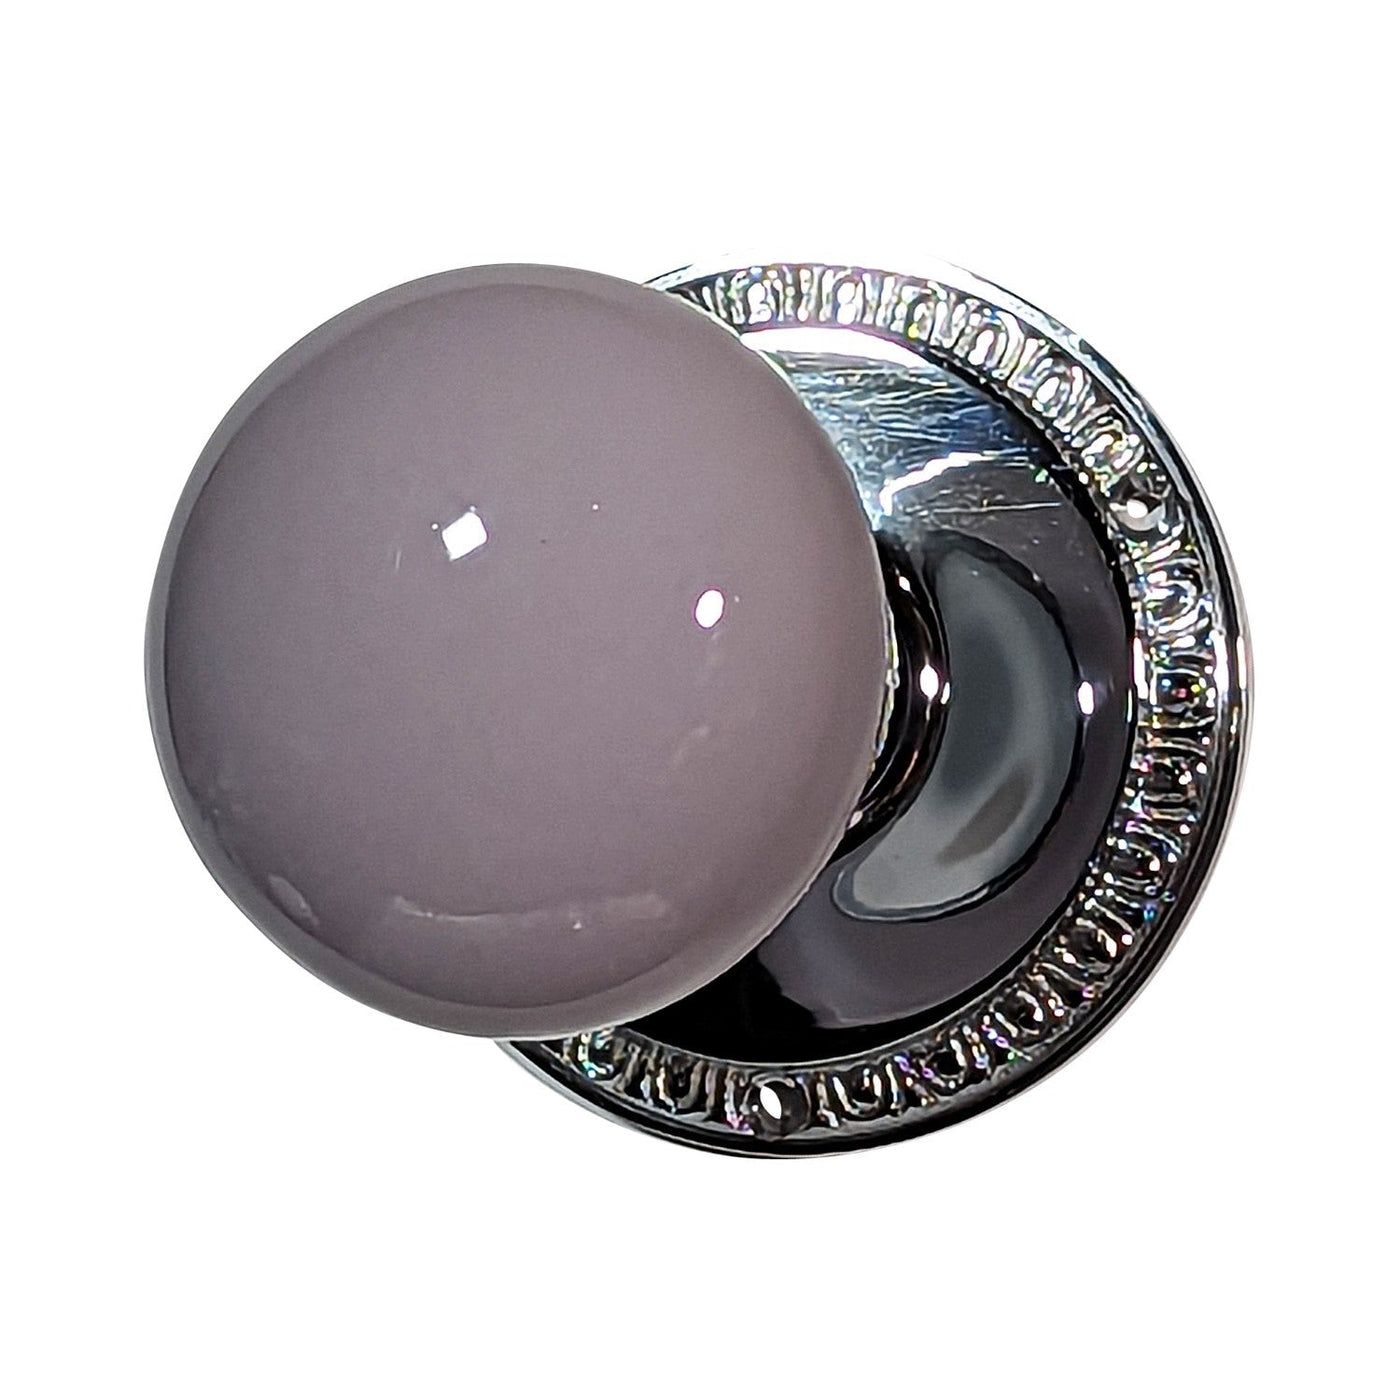 Grey Porcelain Door Knob with Egg & Dart Plate (Several Finishes Available)